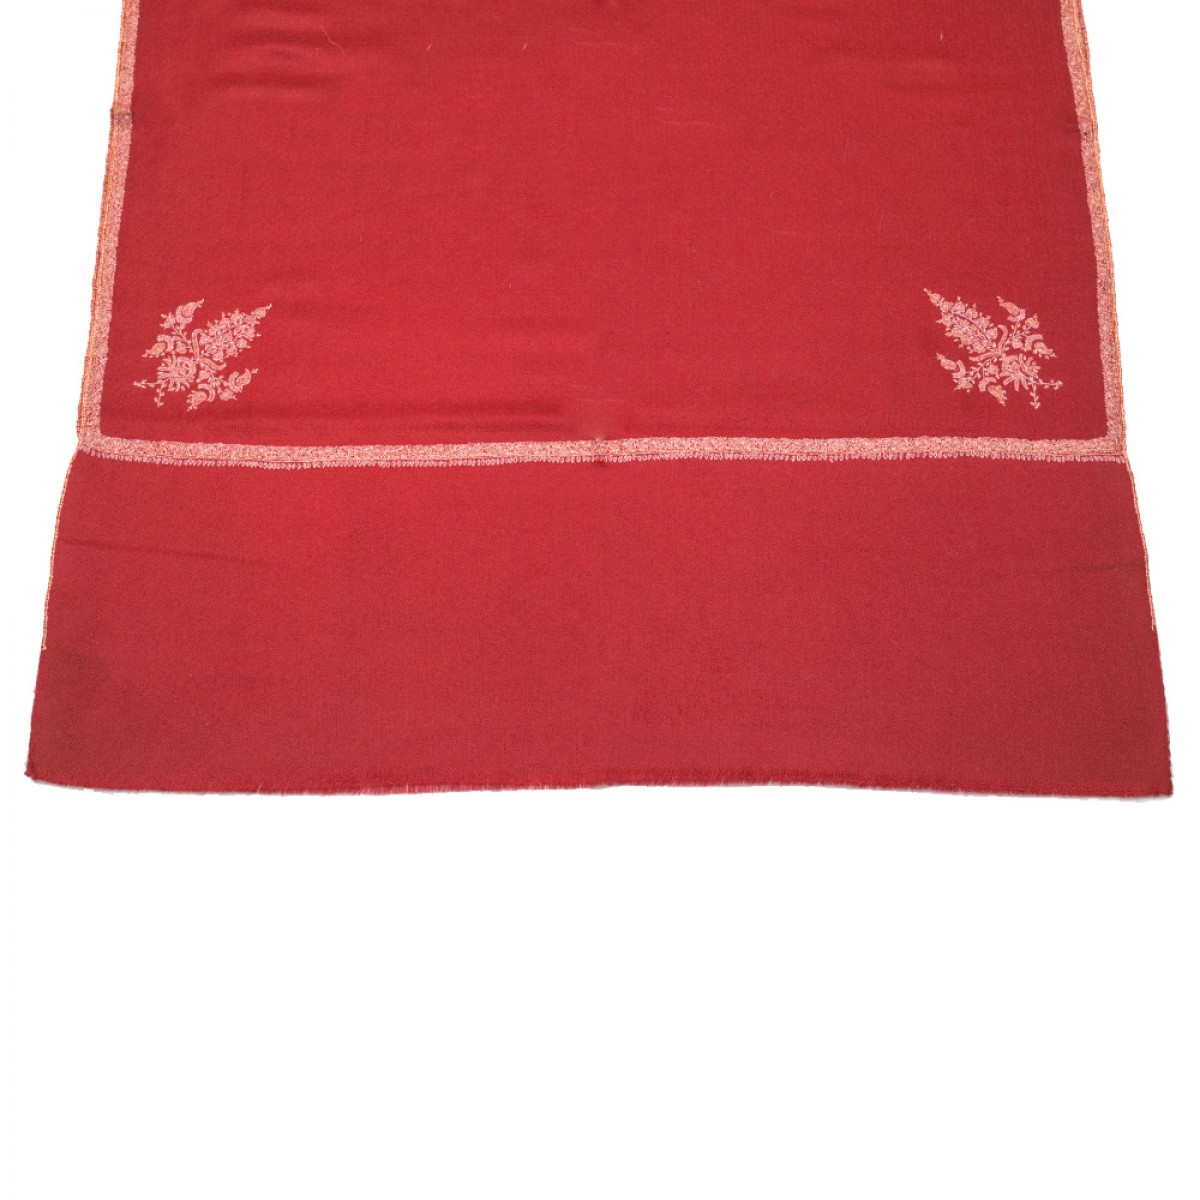 Embroidered Pashmina Stole - Red